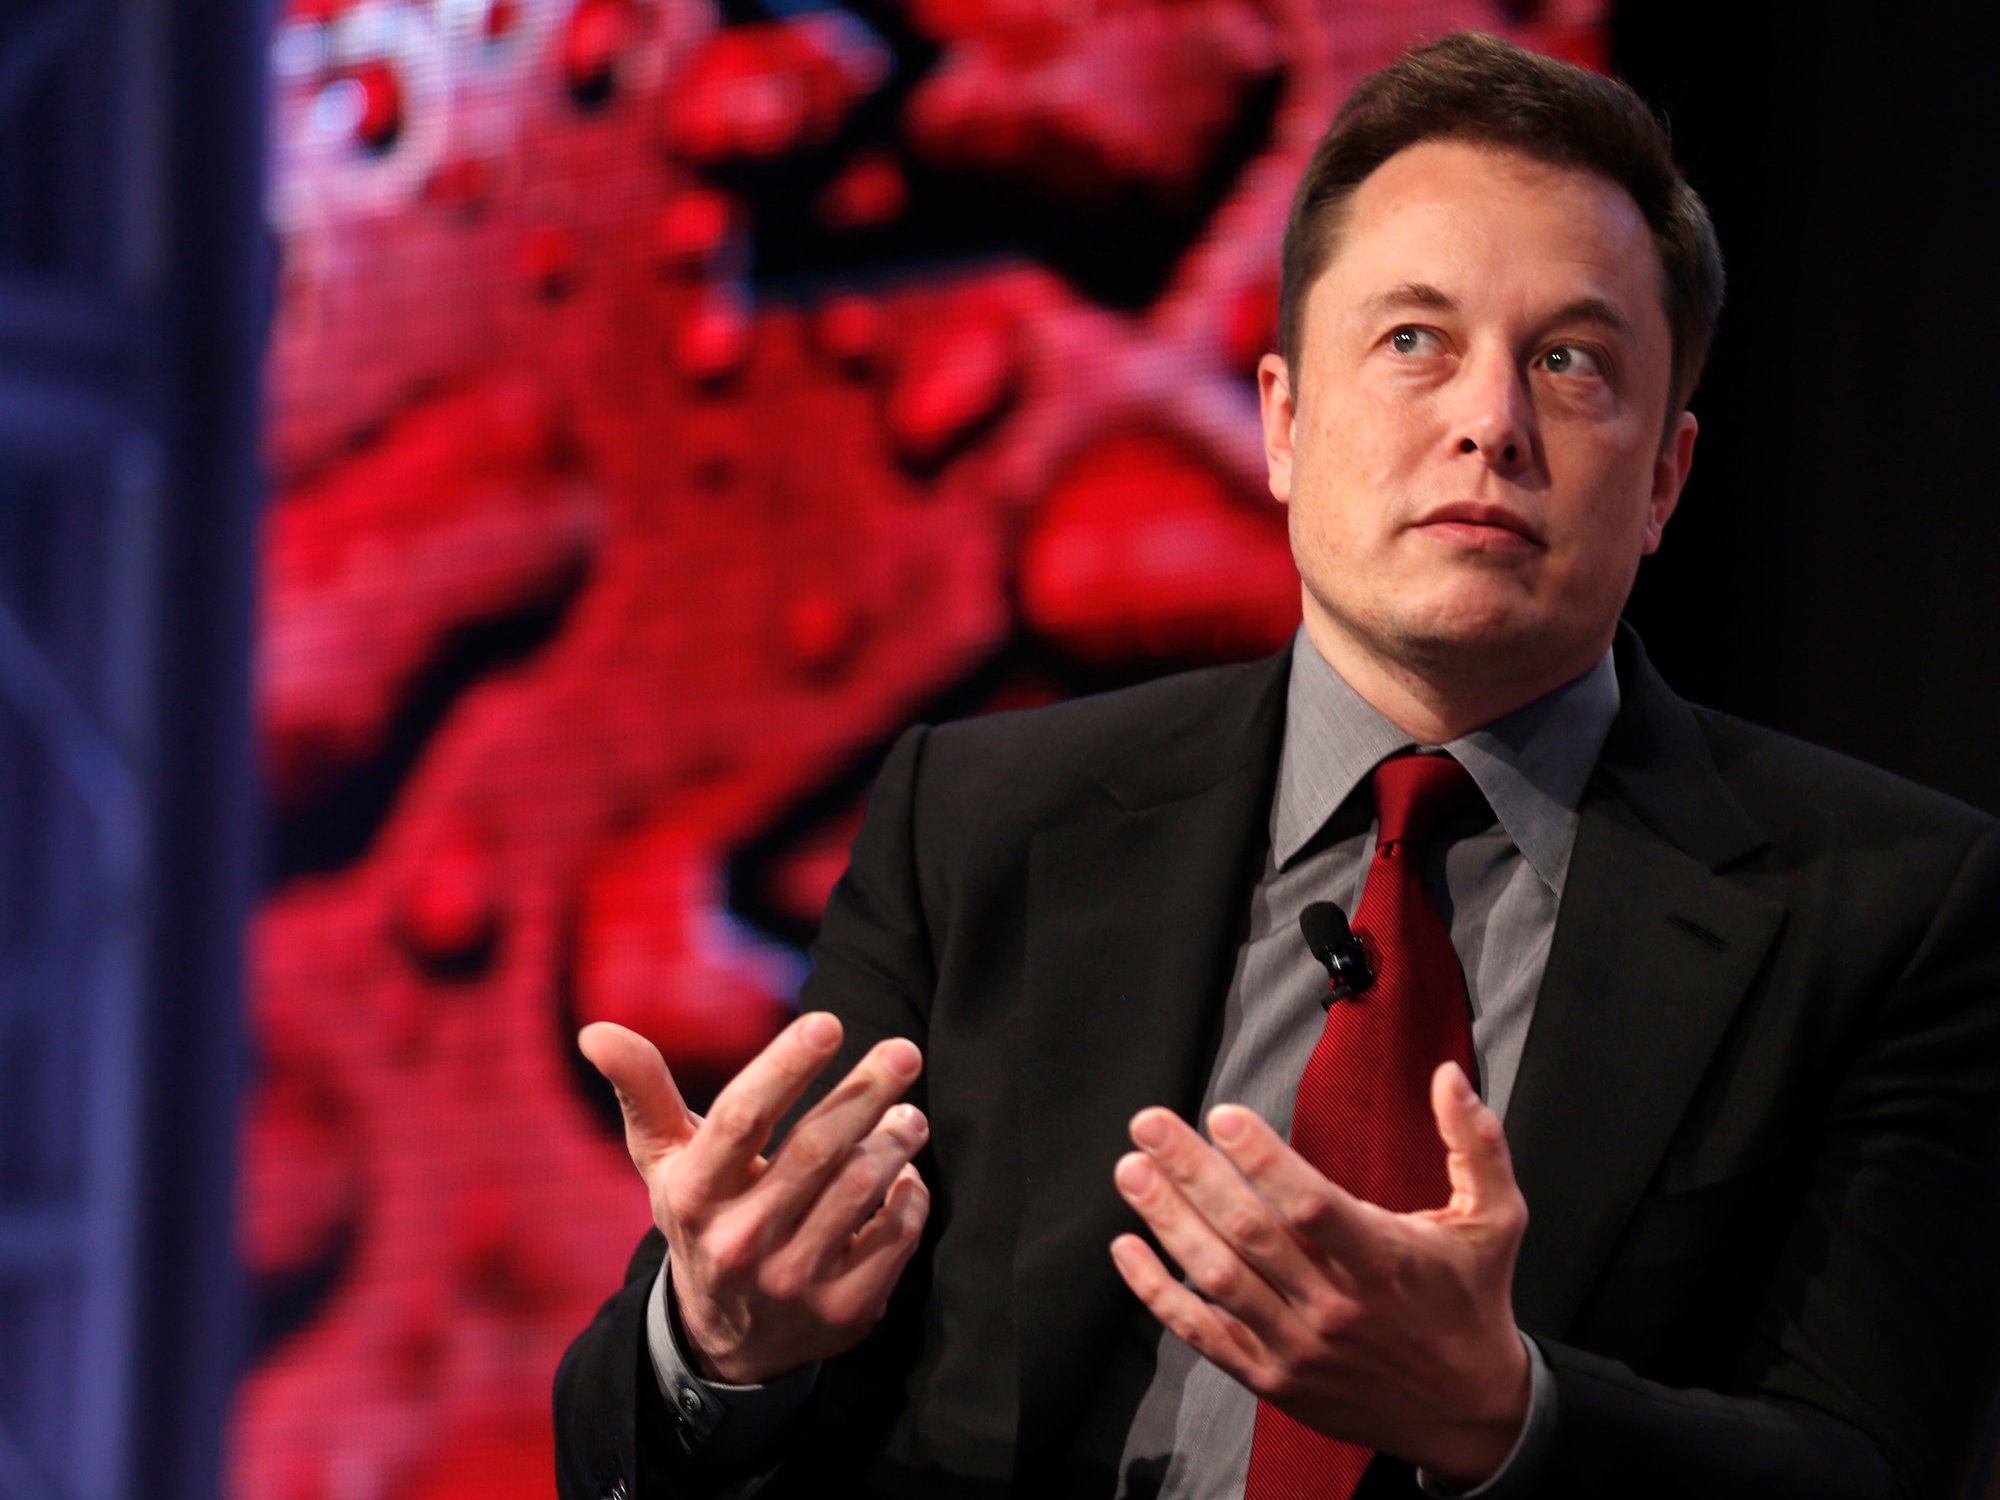 ELON MUSK: "...IF WE NEED TO, WE WILL IN-SOURCE IT (THE CAR INSURANCE)..."